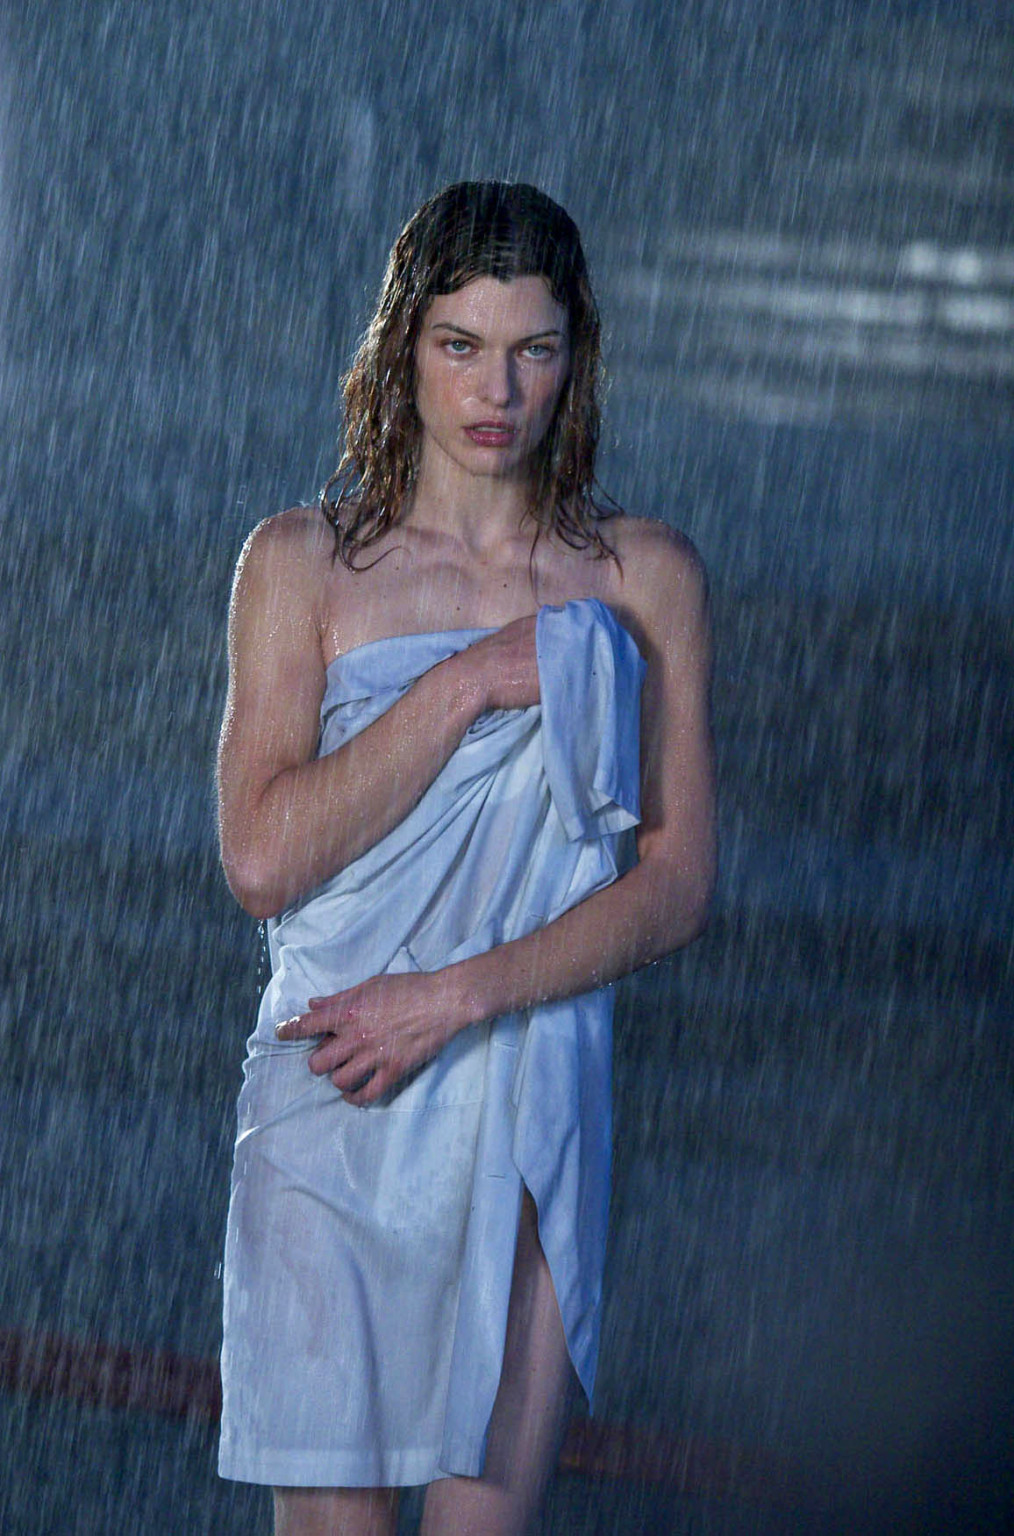 Milla Jovovich looking hot  armed to the teeth in the 'Resident Evil: Apocalypse #75233214